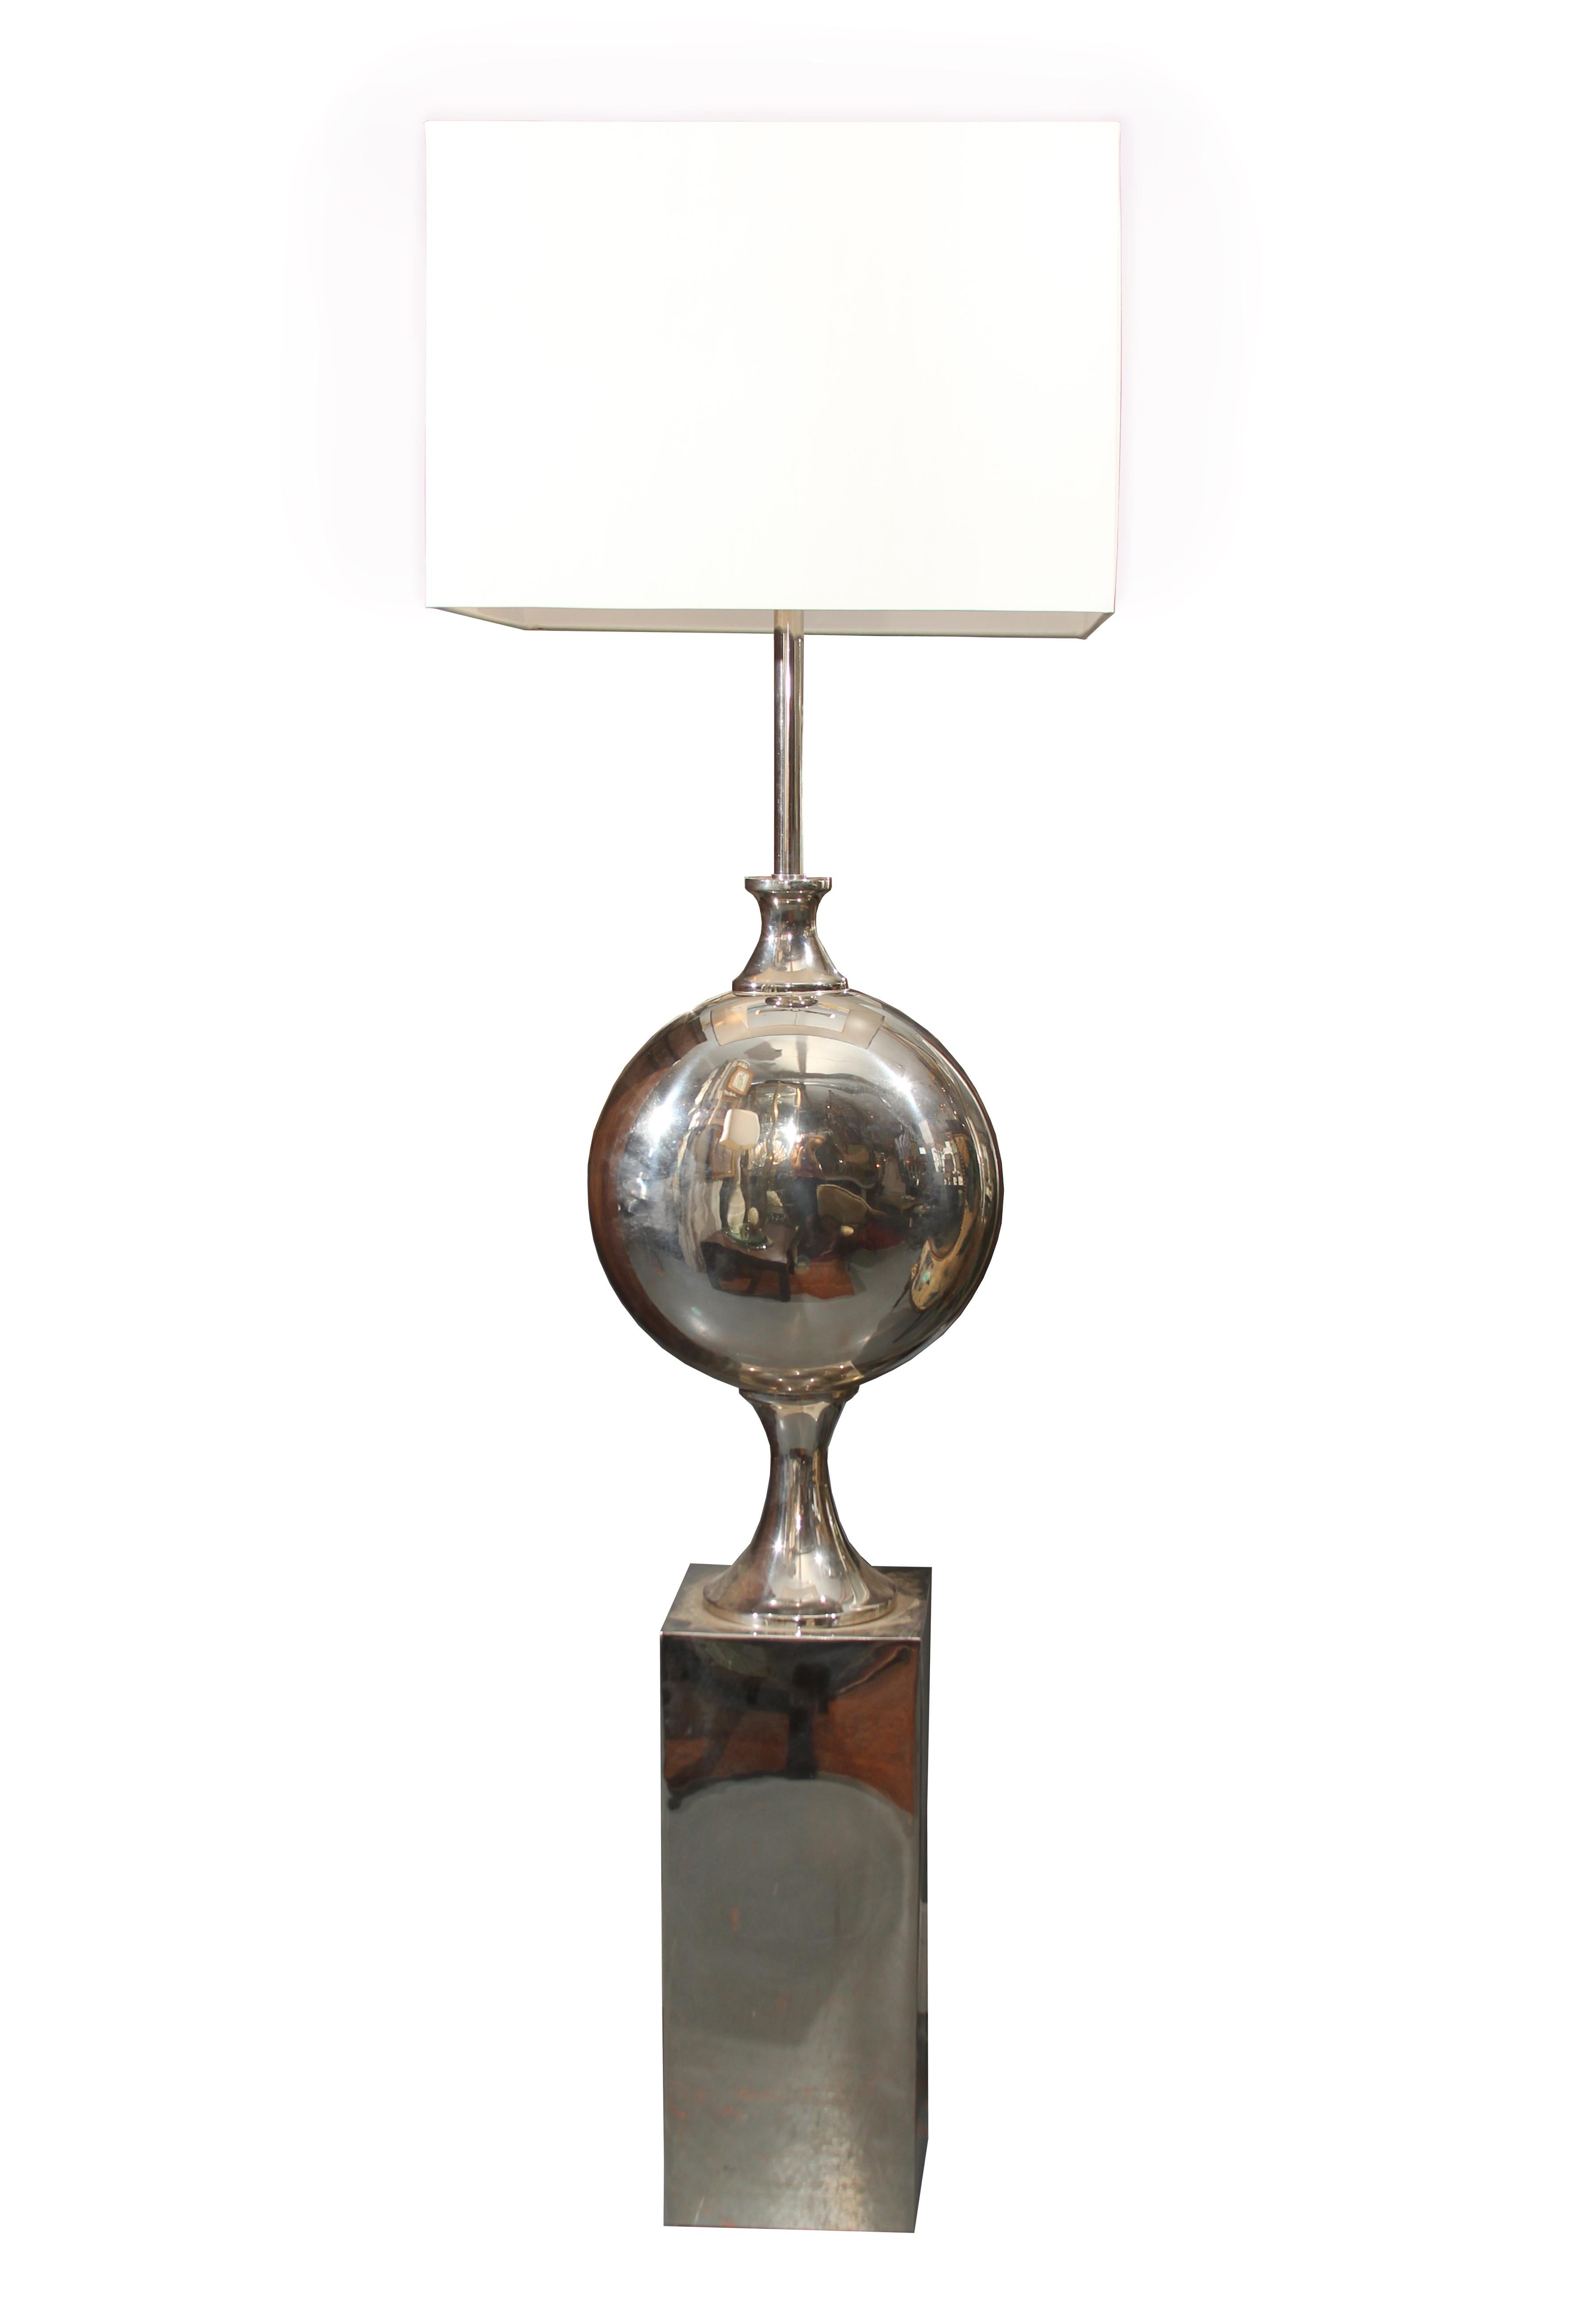 Large dramatic chrome floor lamps with large square linen shades these function as sculpture as well as task lighting. Shades measure 20 x 20 x 14 tall.